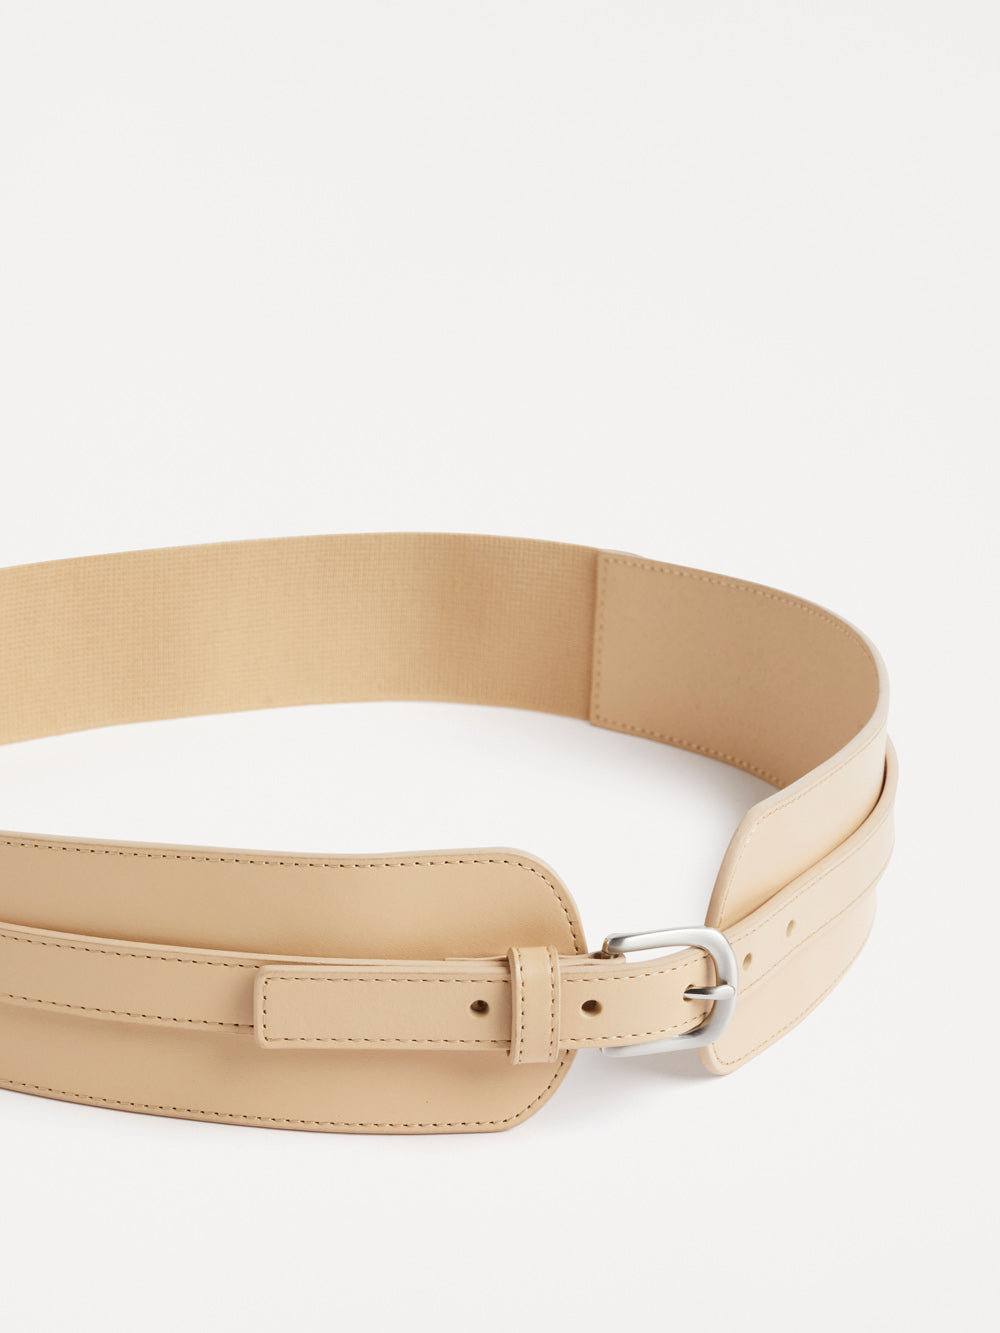 The Leather Waisted Belt